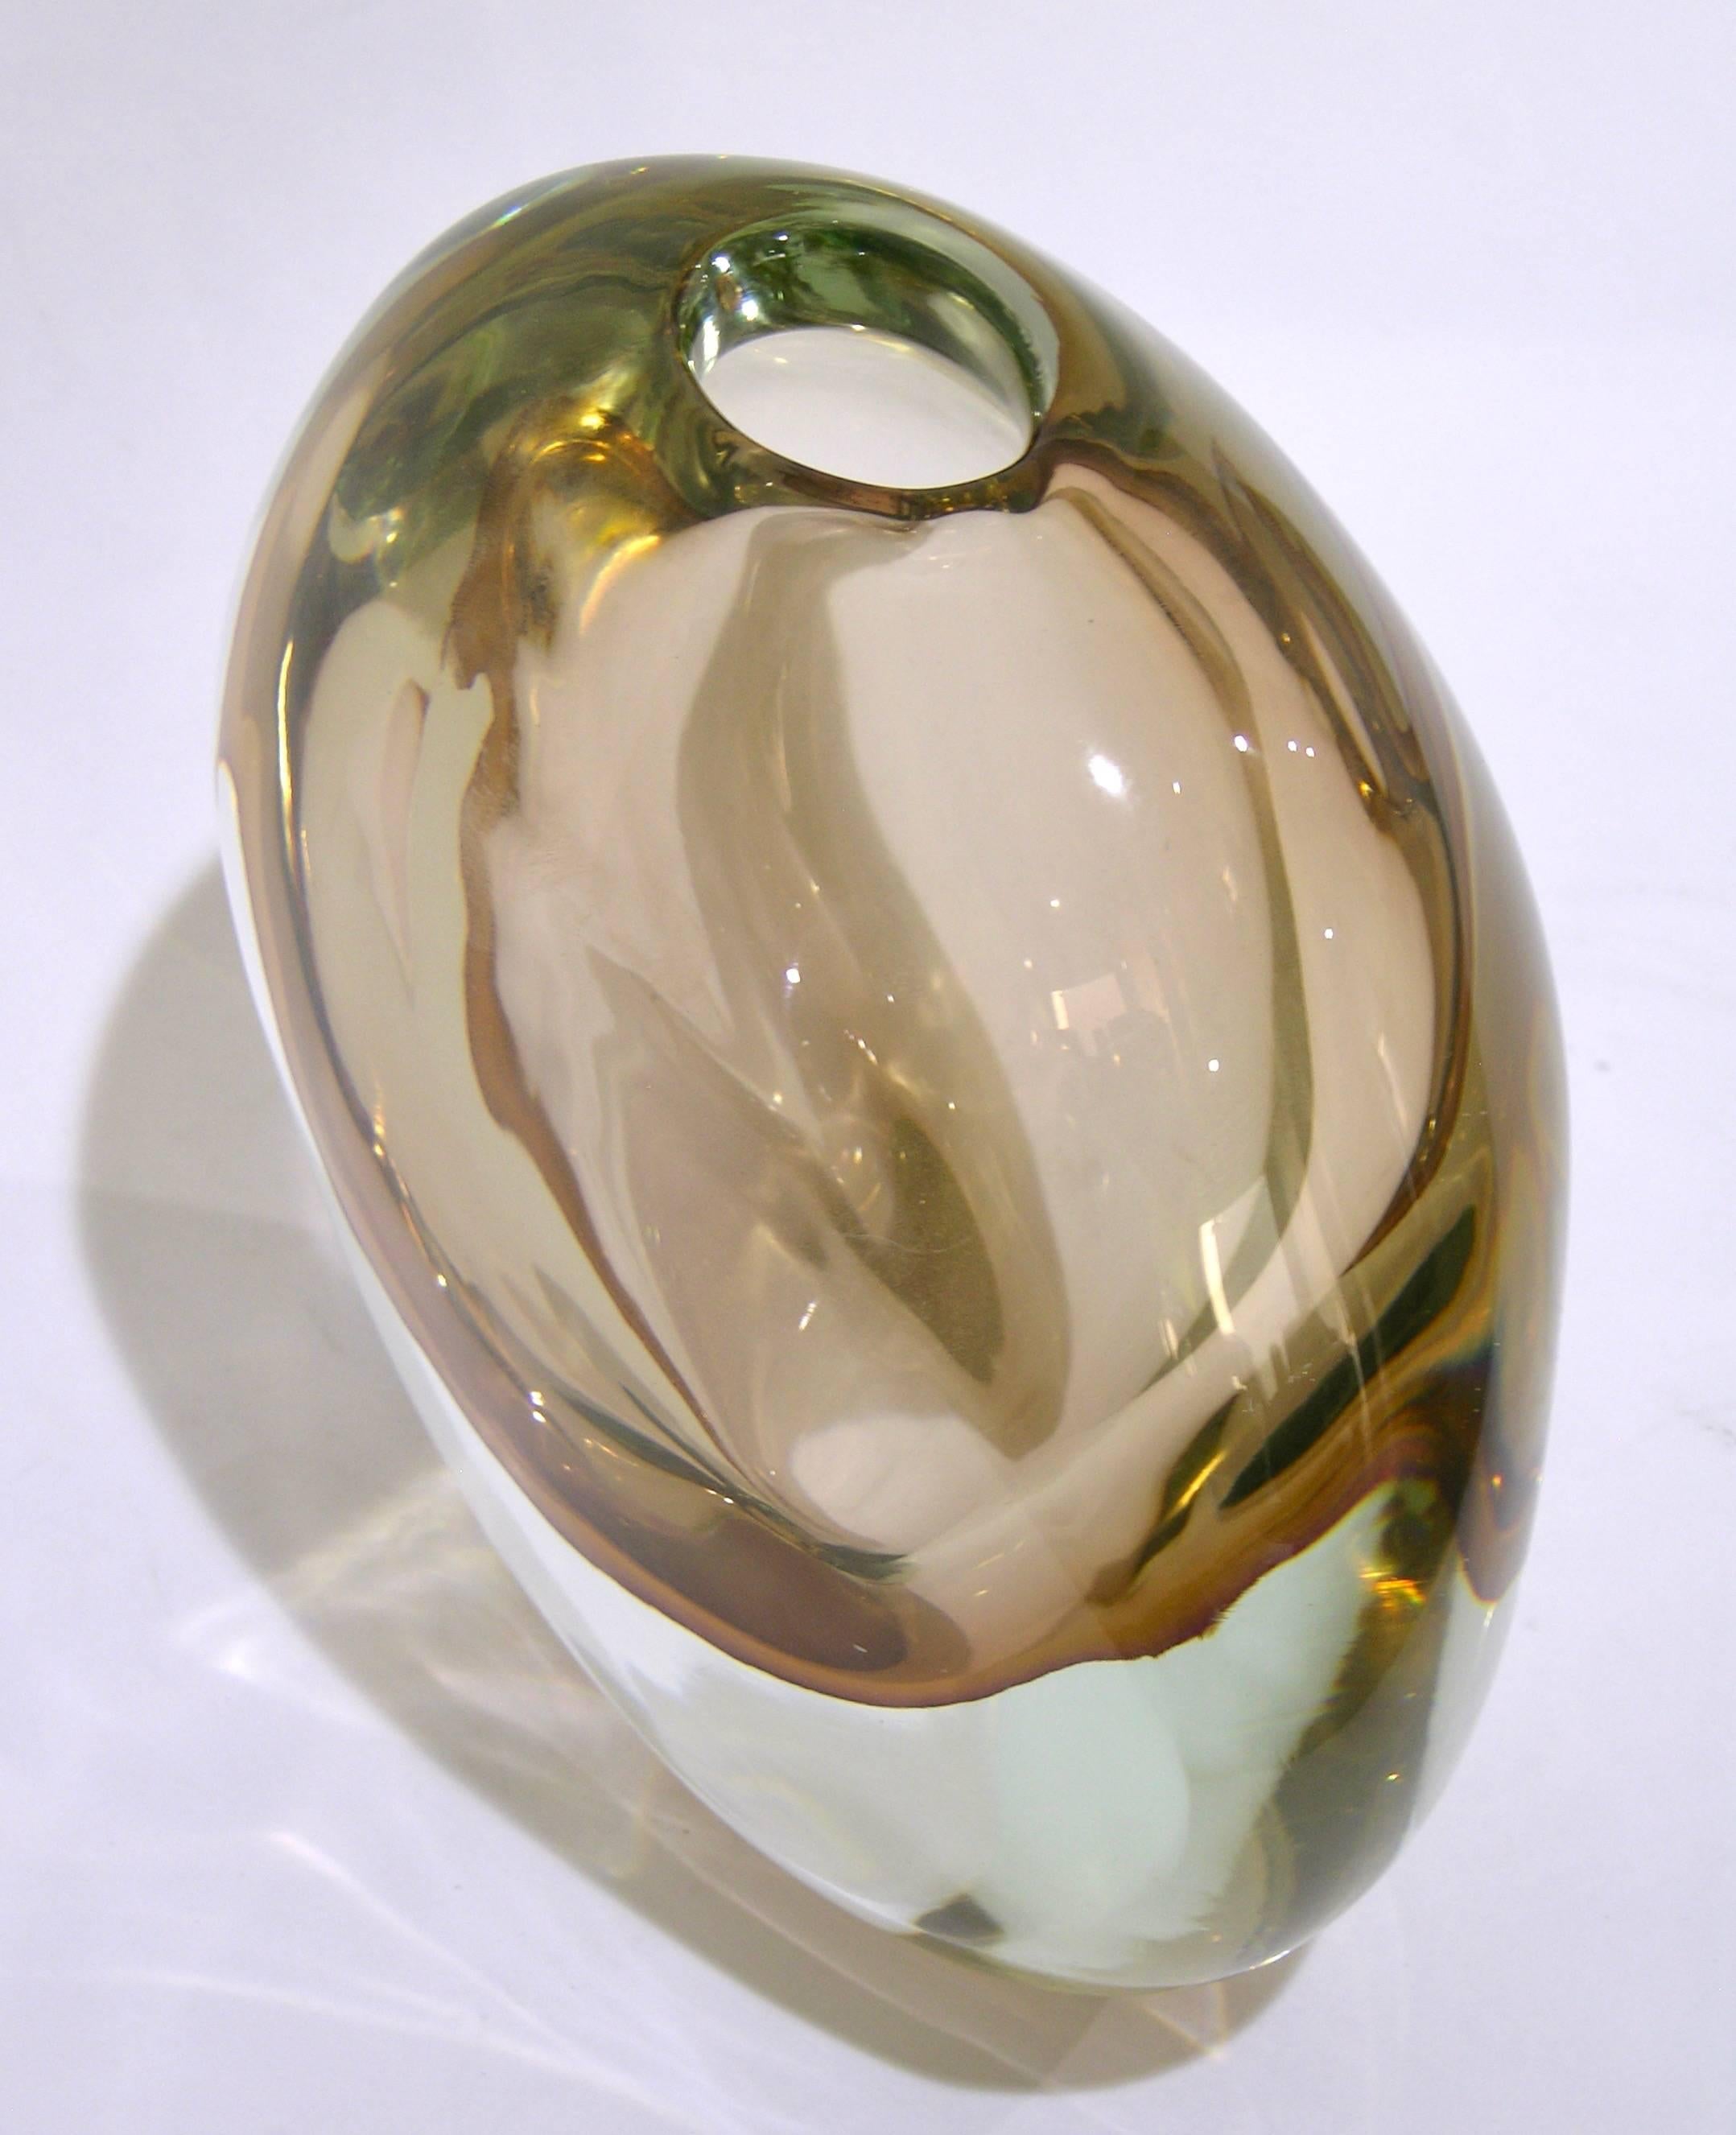 Signed Formia Murano, a sophisticated vase with Art Deco flair in blown Murano glass of rare color, a smoked pink champagne rose´ worked in sommerso, overlaid in crystal clear Murano glass. The organic minimalist ovoid shape of the piece adds to its